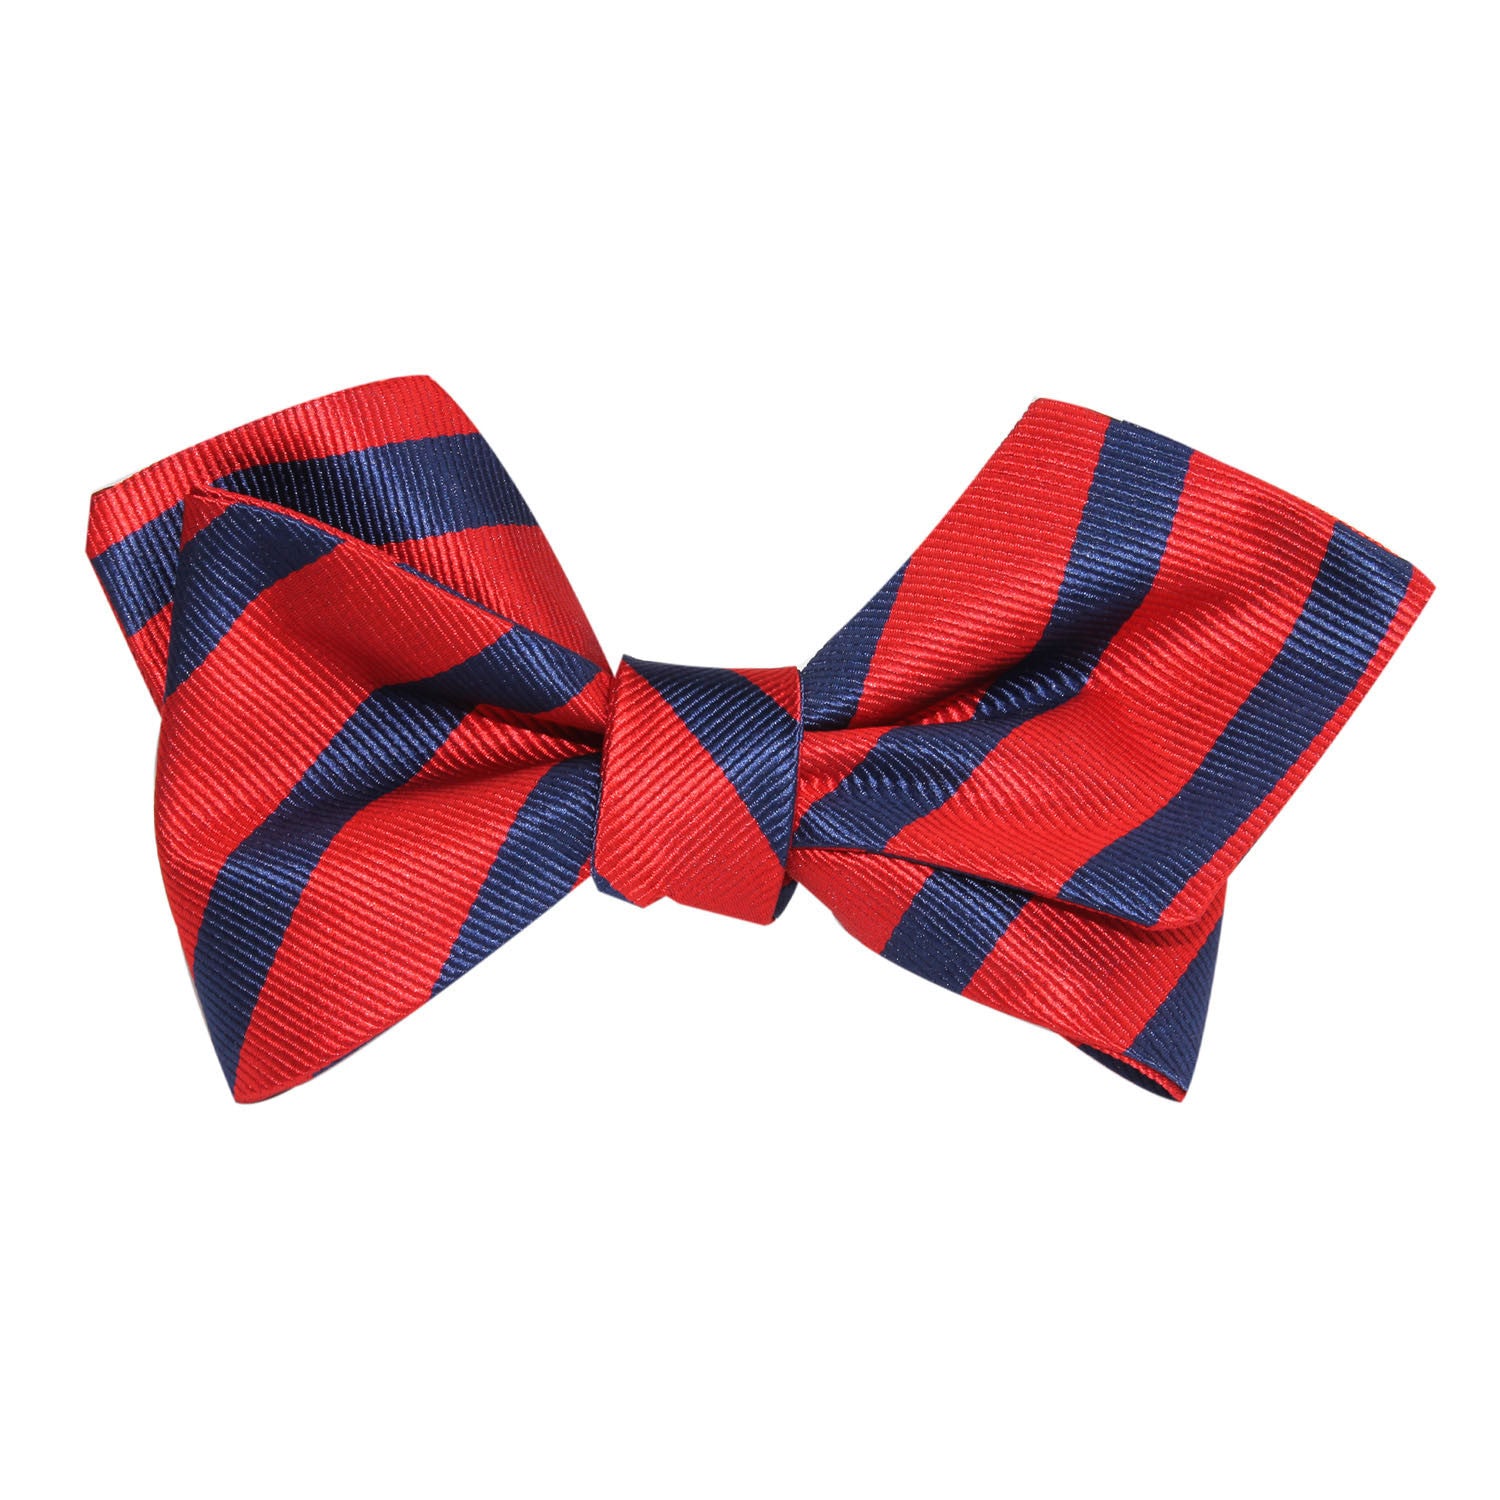 Red and Navy Blue Striped Self Tie Diamond Tip Bow Tie 1